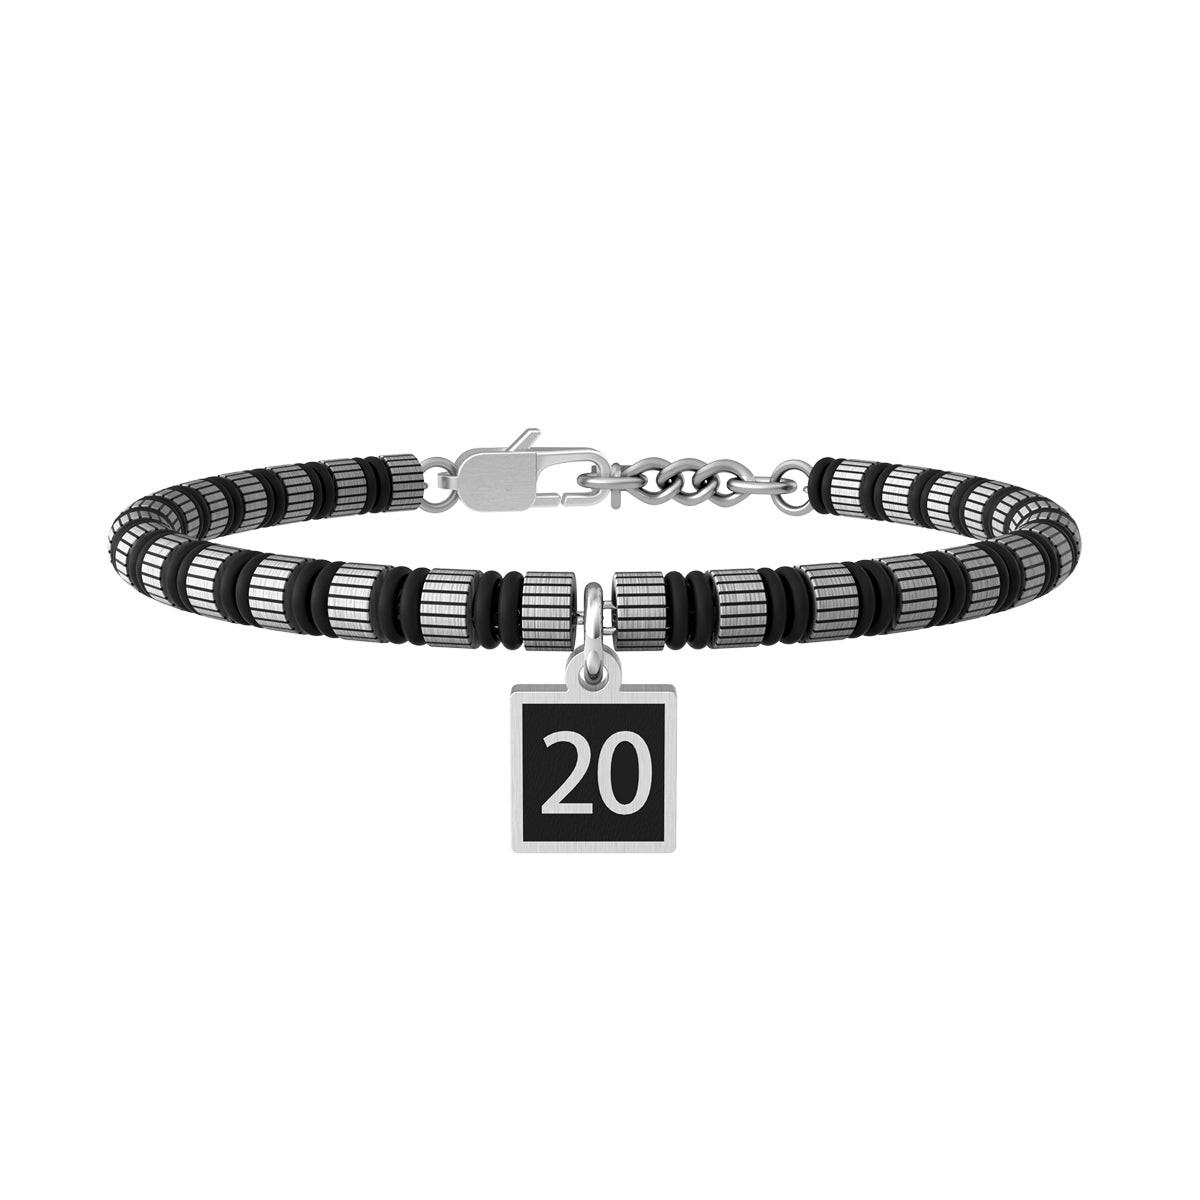 Light Gray Bracciale Kidult Uomo 20 | THE BEST IS YET TO COME 731979